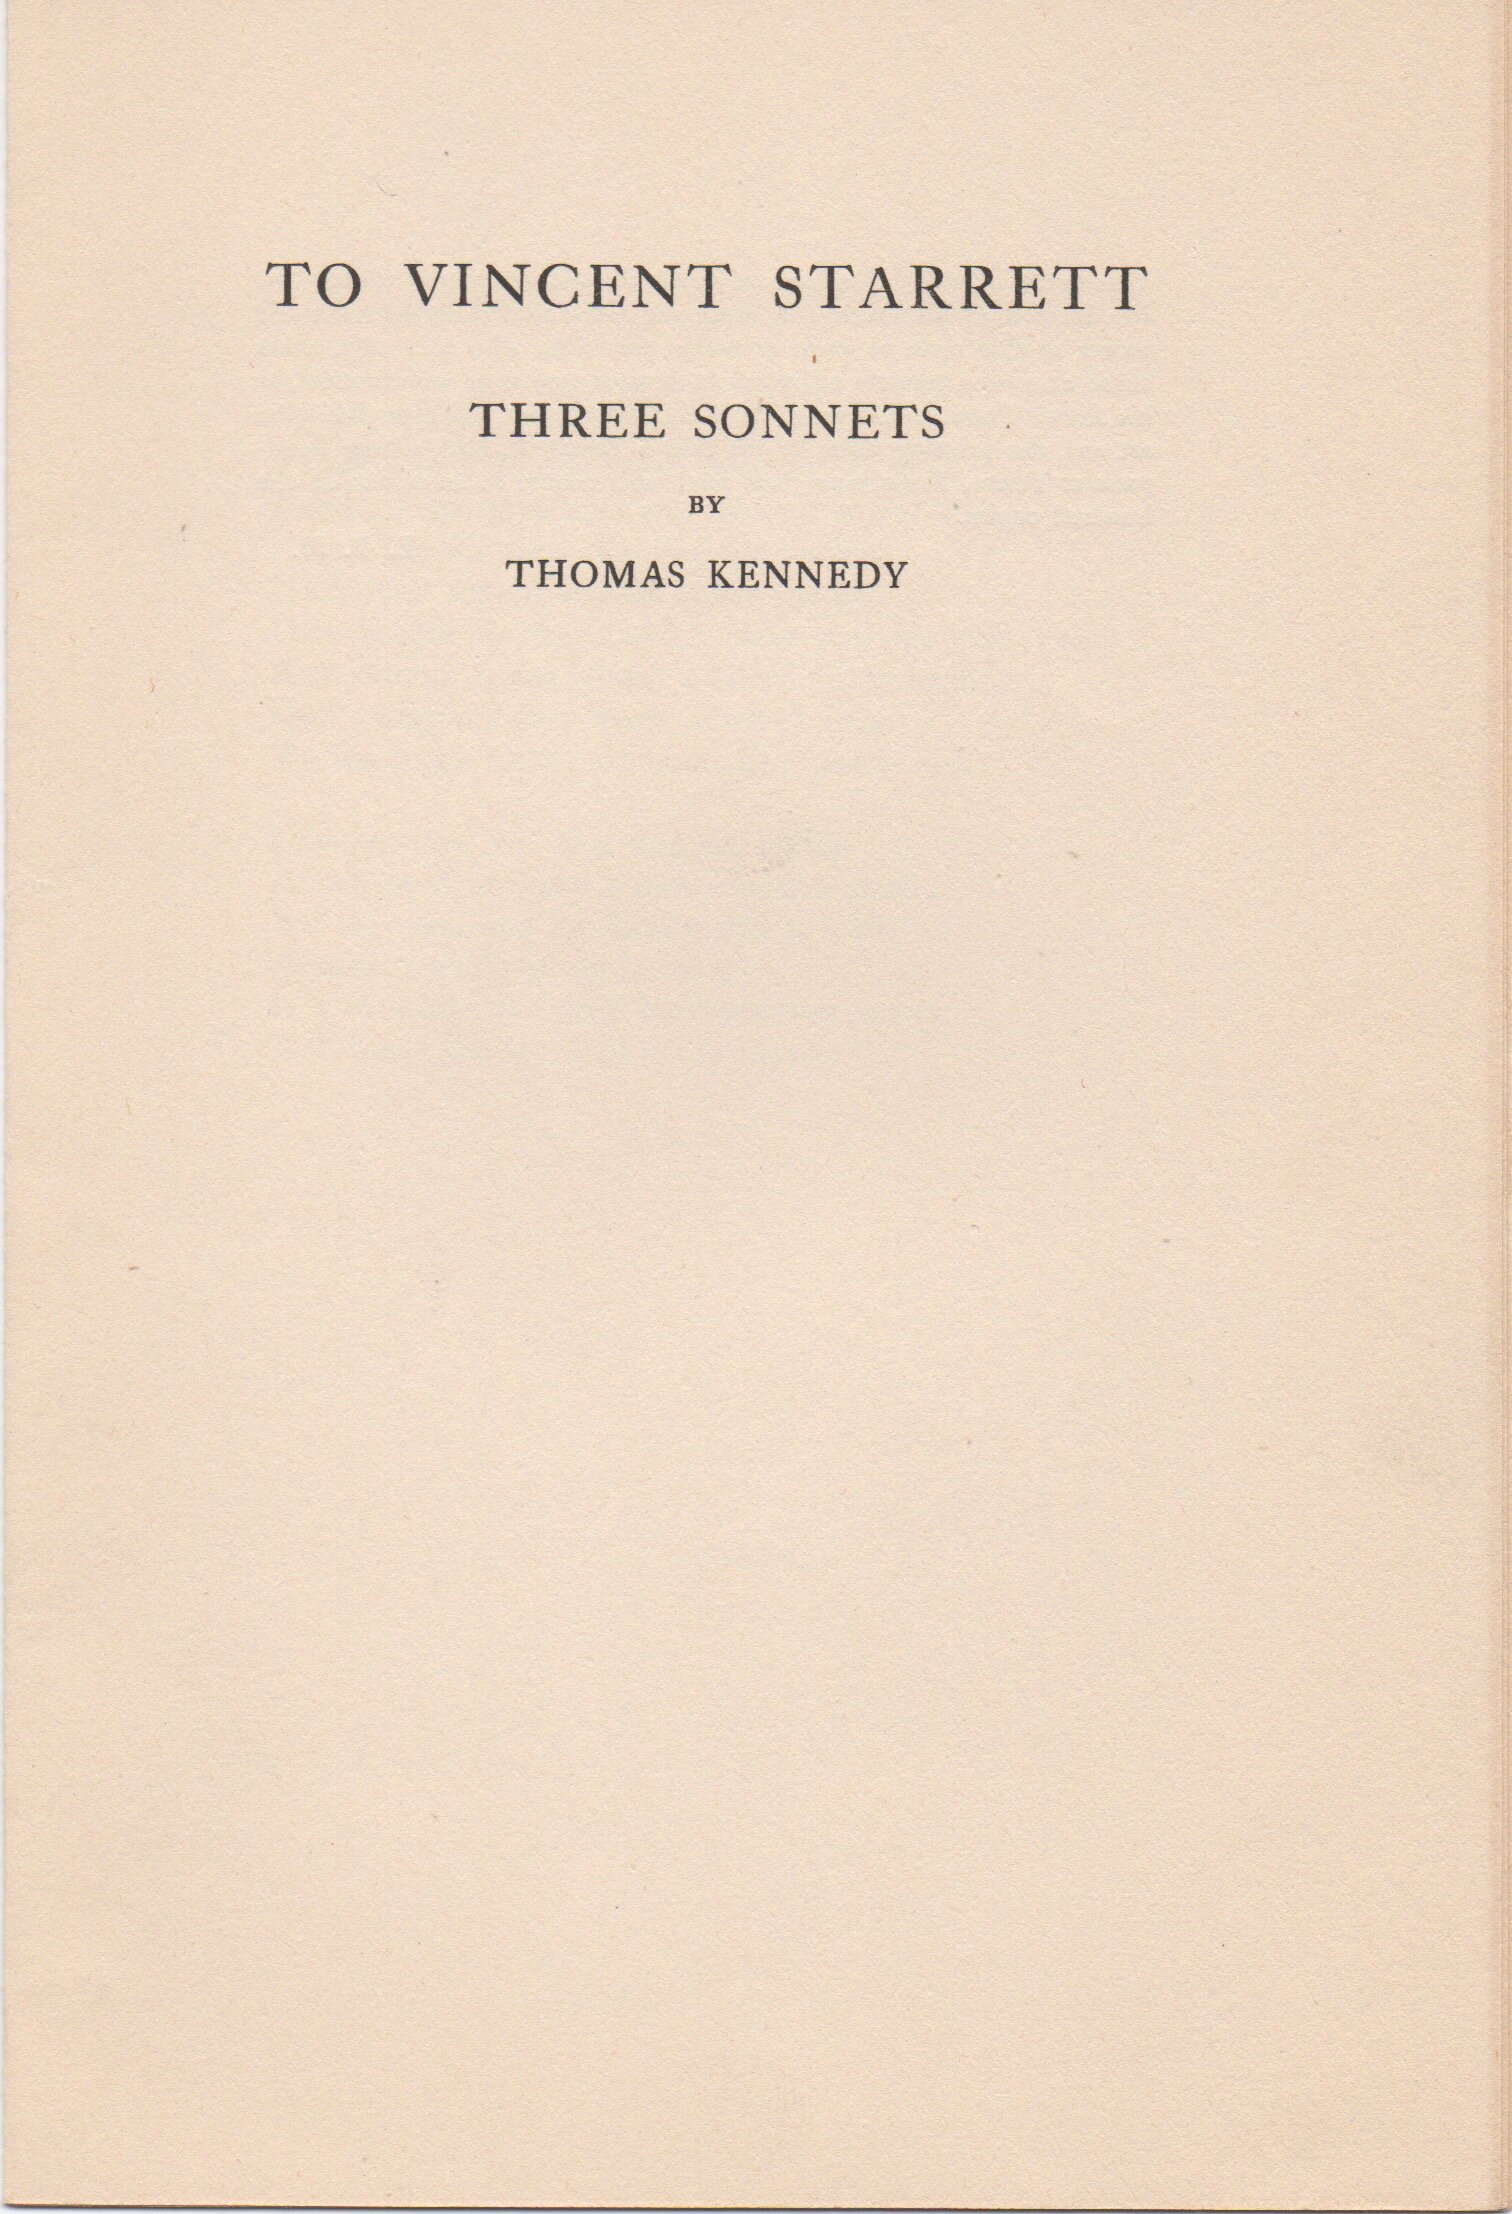 To VS 3 Sonnets by Kennedy title.jpeg